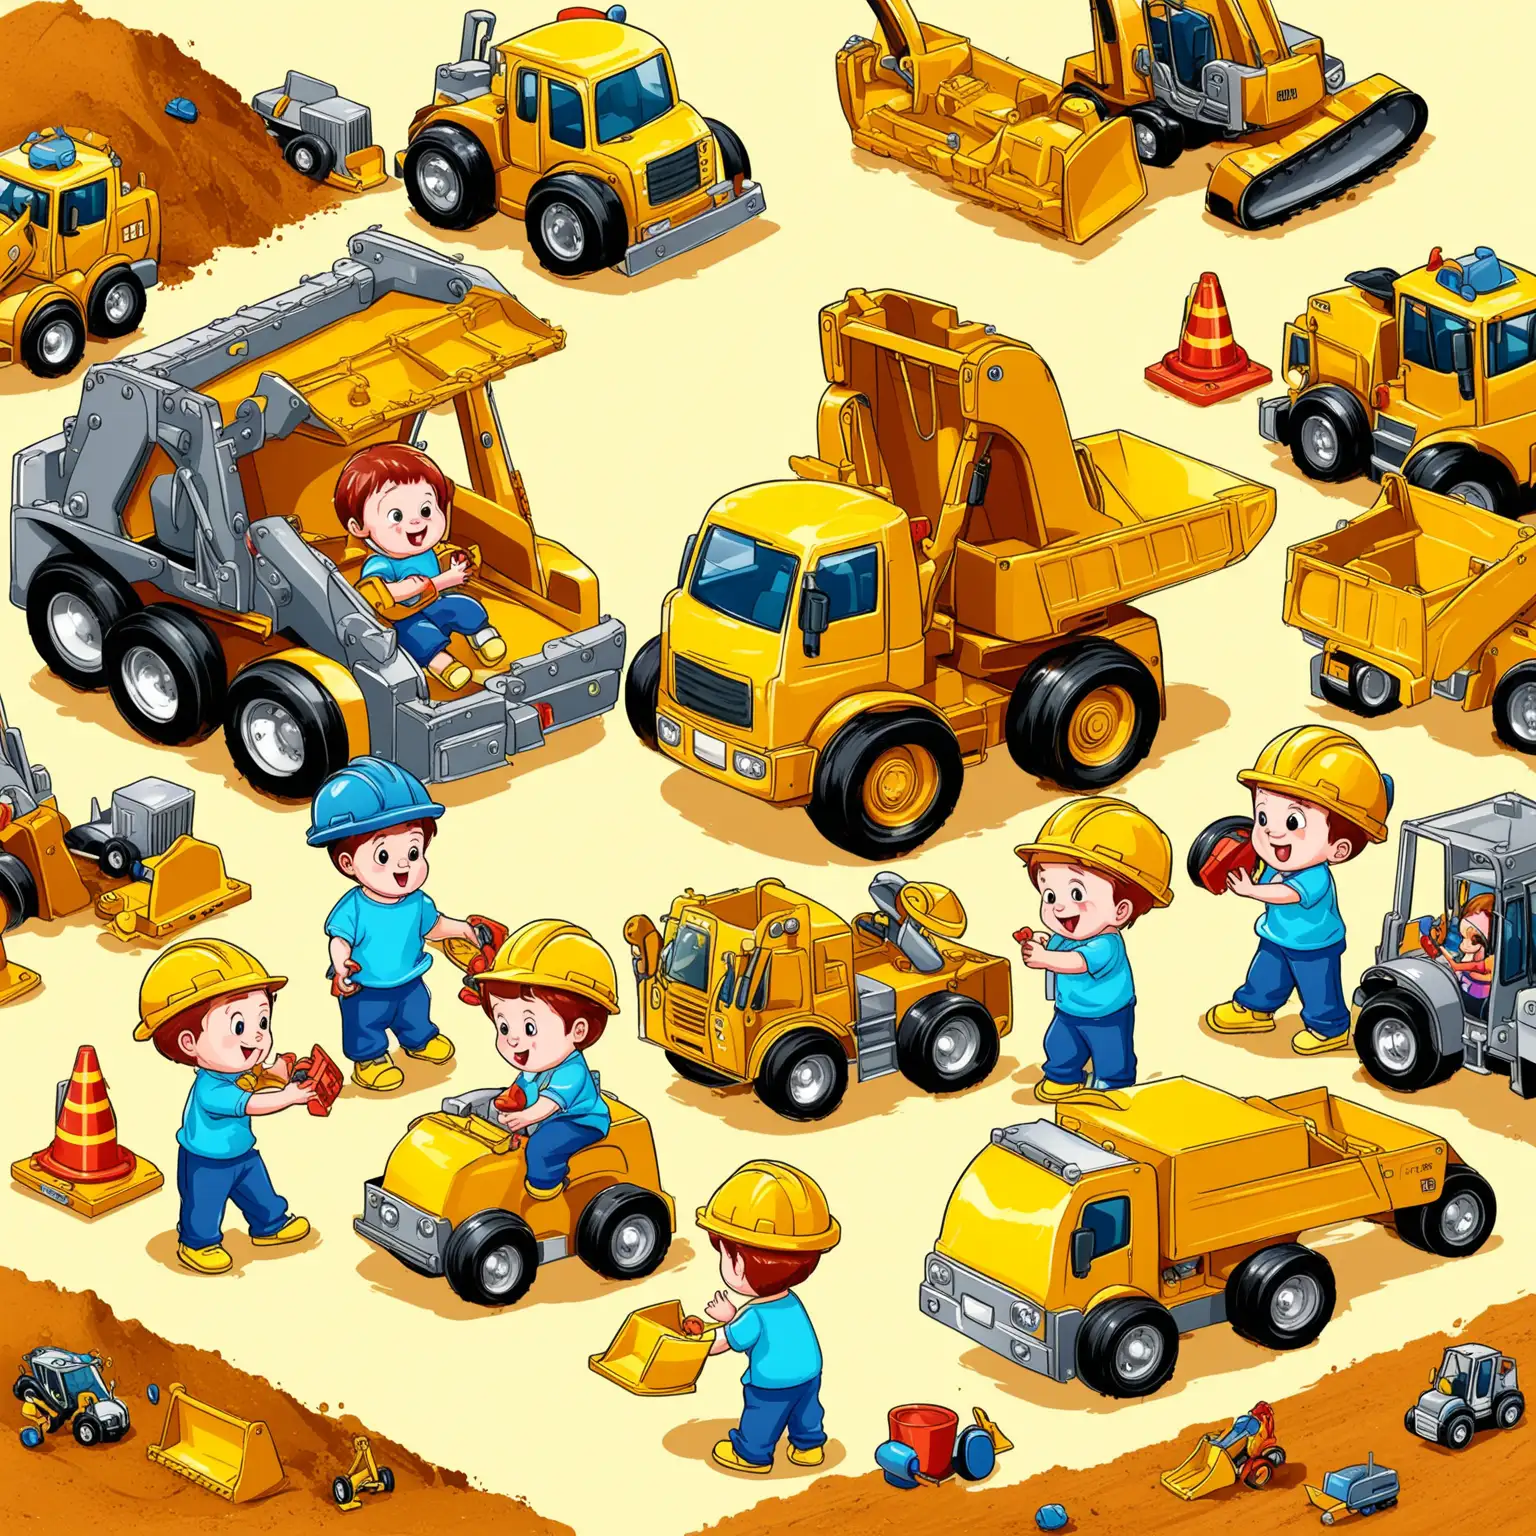 Cheerful Cartoon Kids Playing with Construction Vehicle Toys